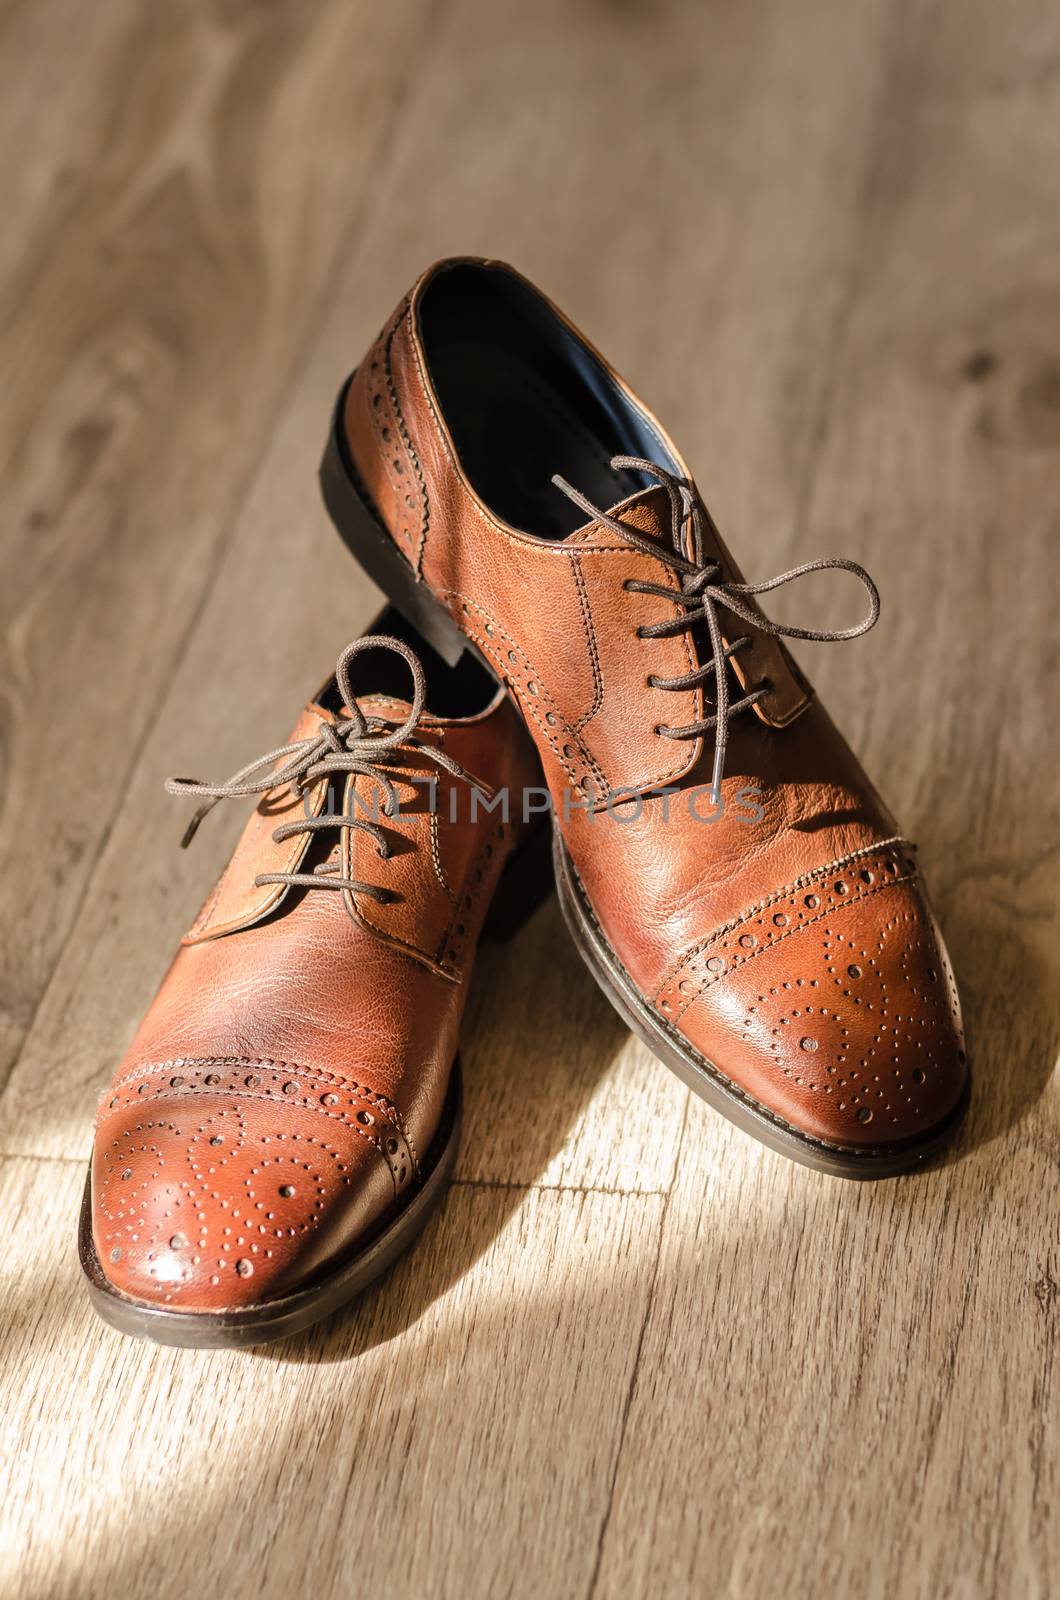 wedding shoes groom by Andreua